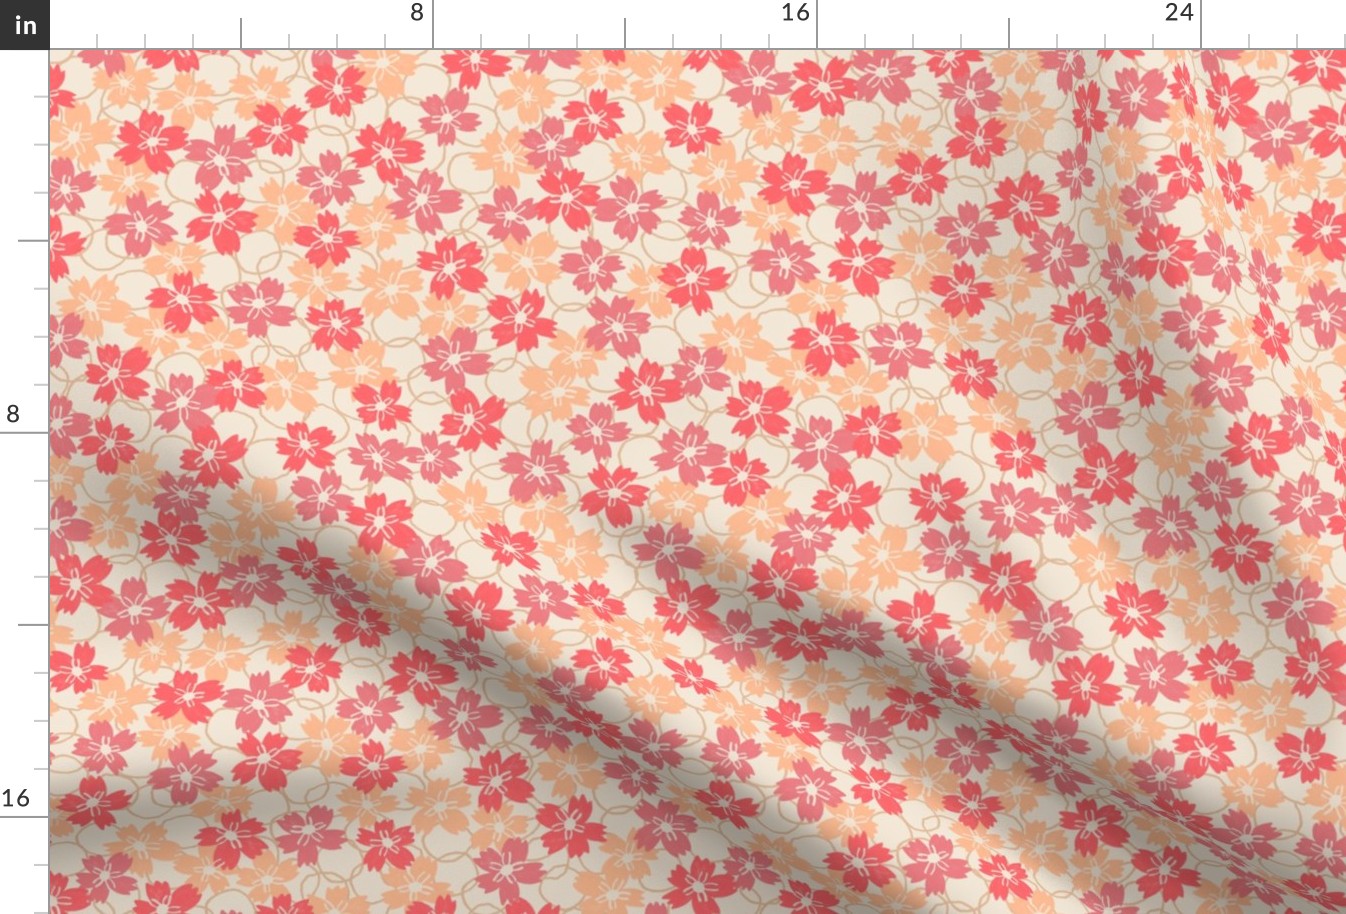 584 - mini micro ditsy peach scale floral with organic background circles - for projects that require small  florals like patchwork, quilting ,dollhouse decor, baby accessories, hair bows